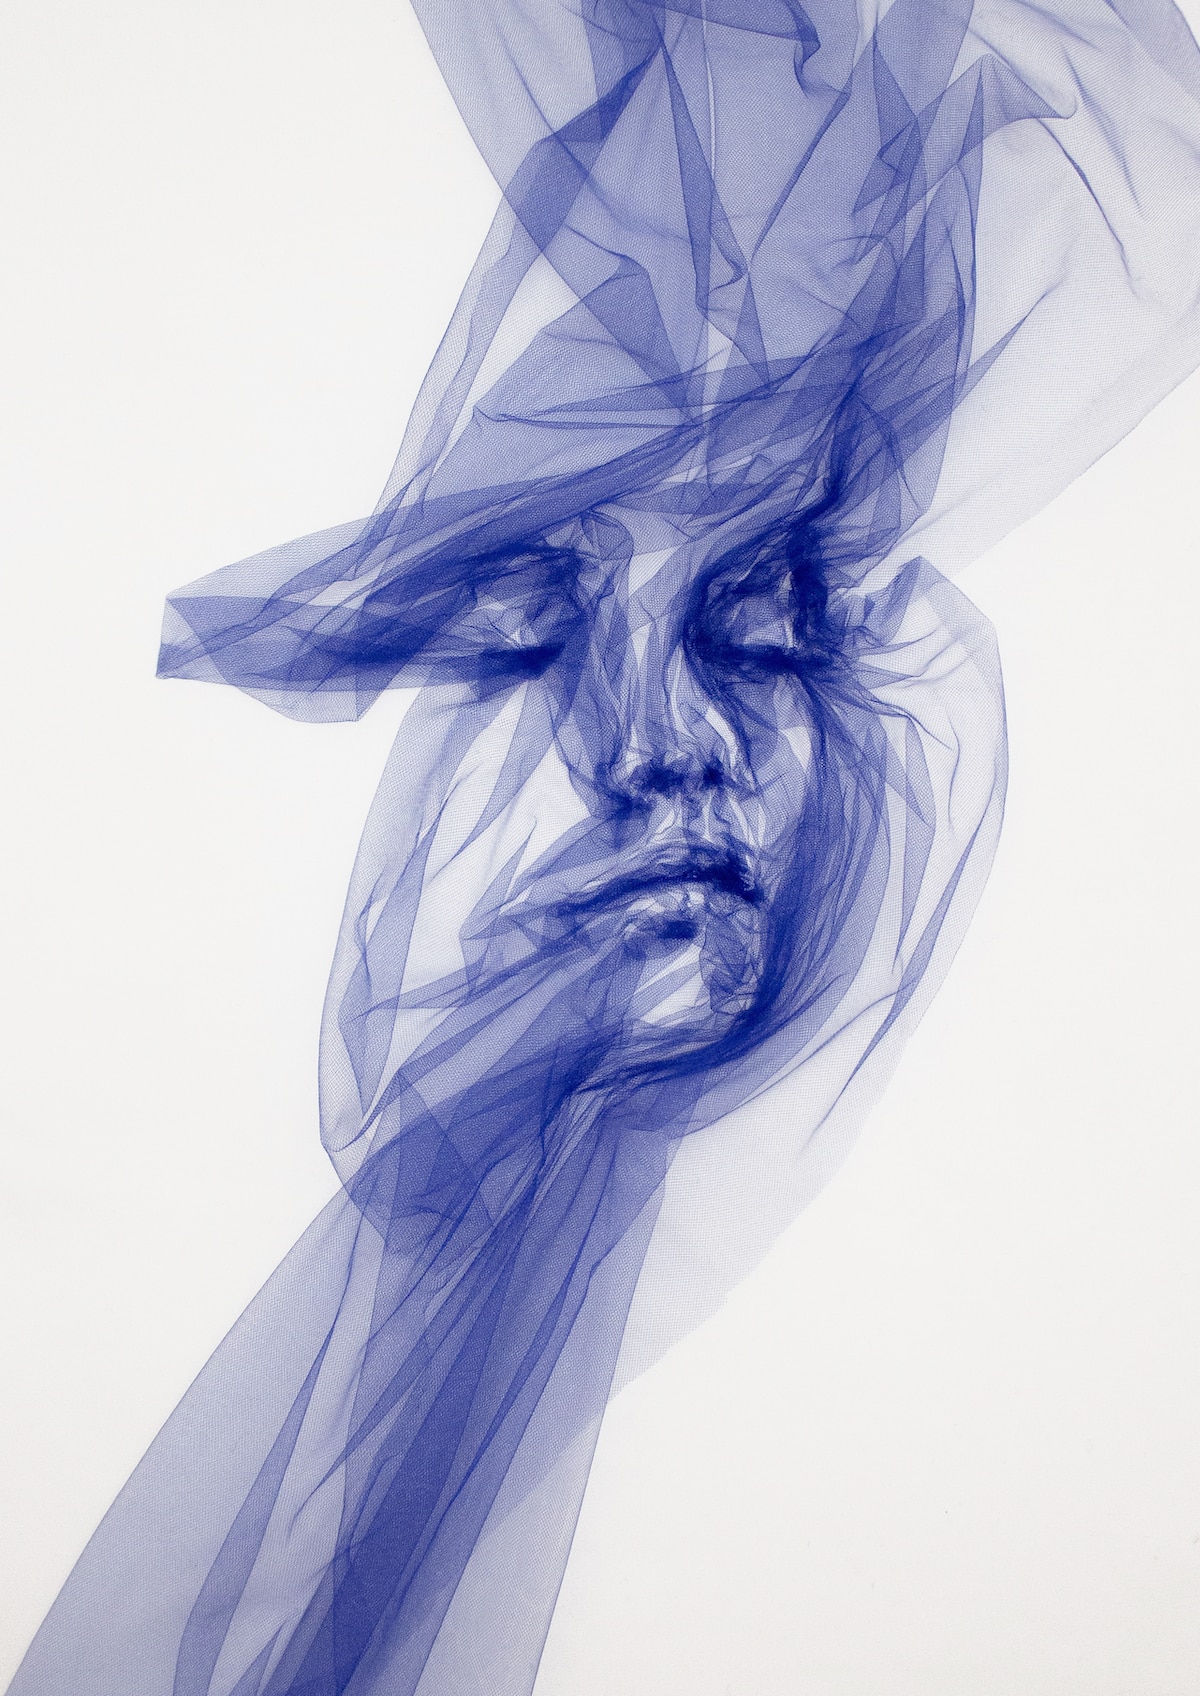 An example of Art Materialism - a face emerging from a single piece of tulle by artist Benjamin Shine